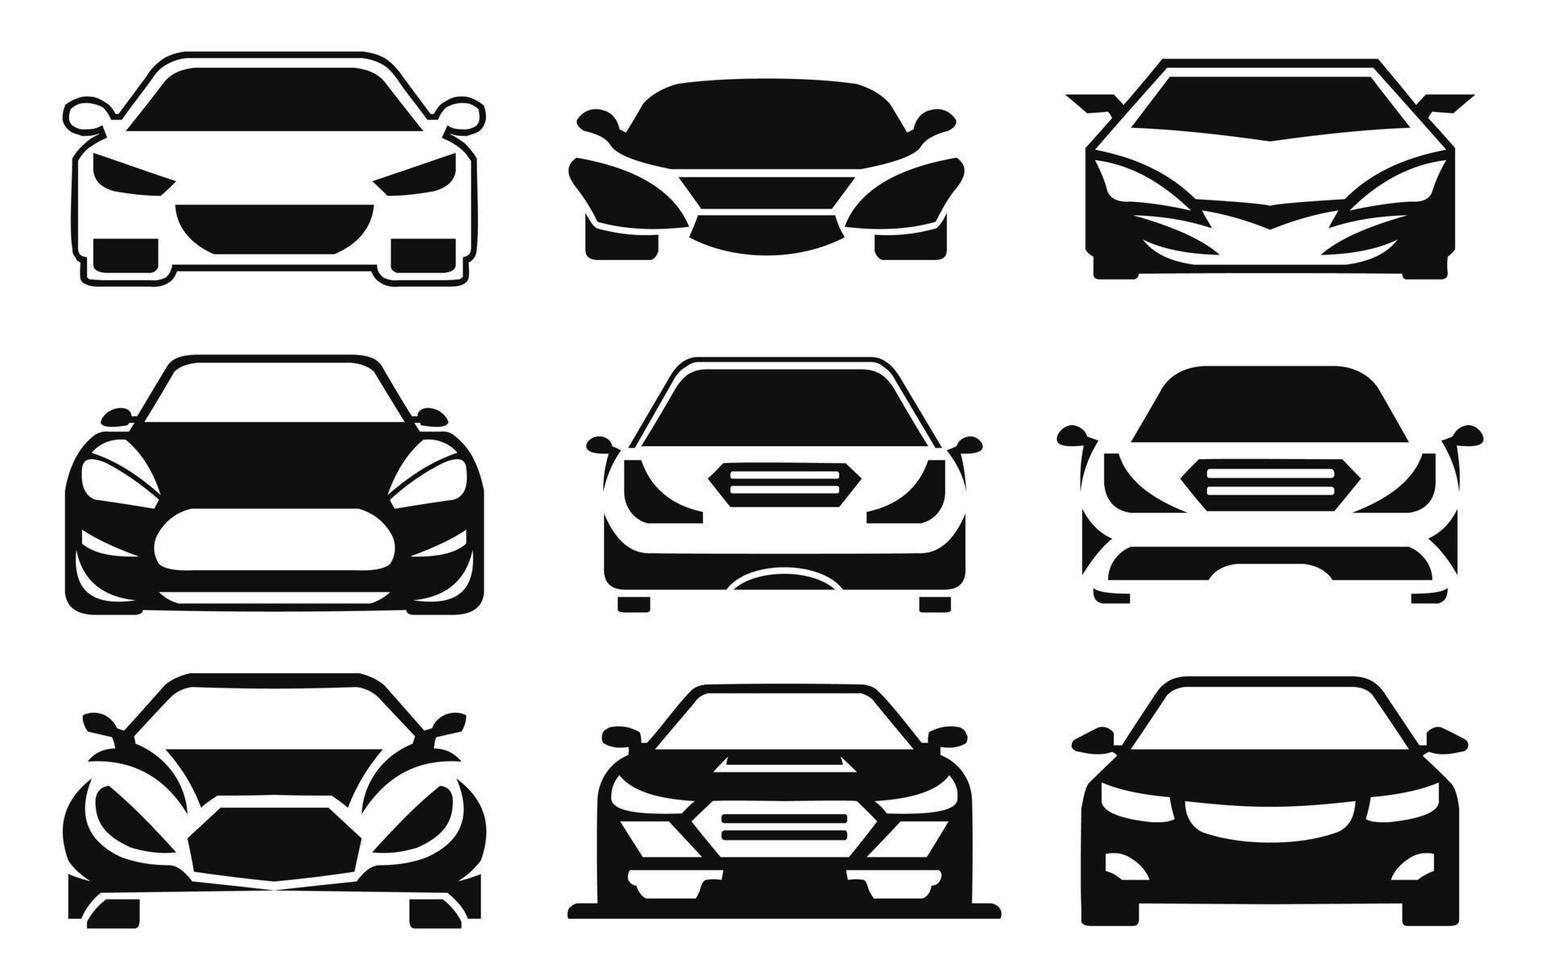 Car symbol logo template, stylized vector silhouette